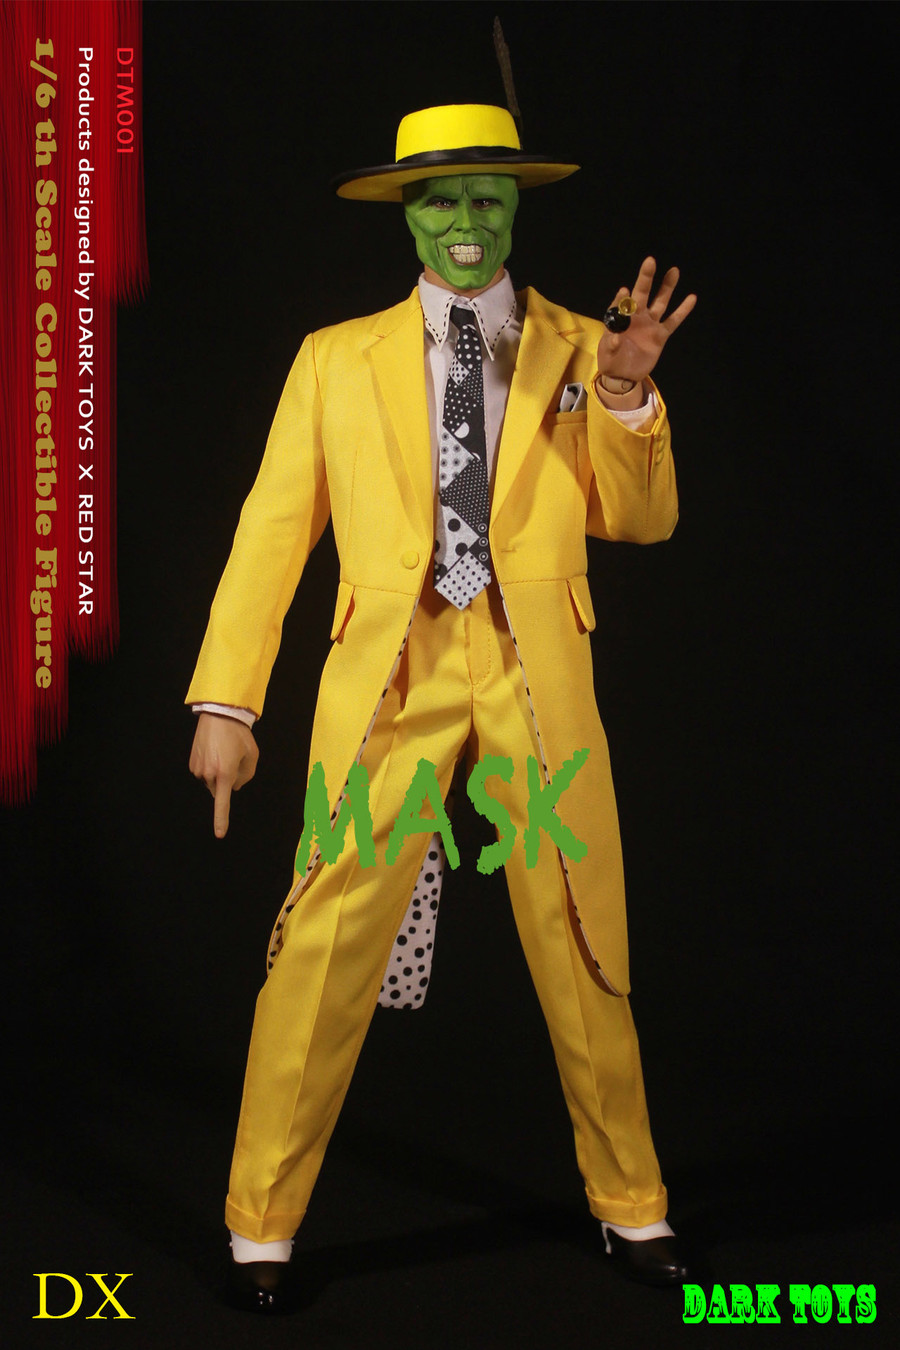 Dark Toys - MASK Deluxe Edition